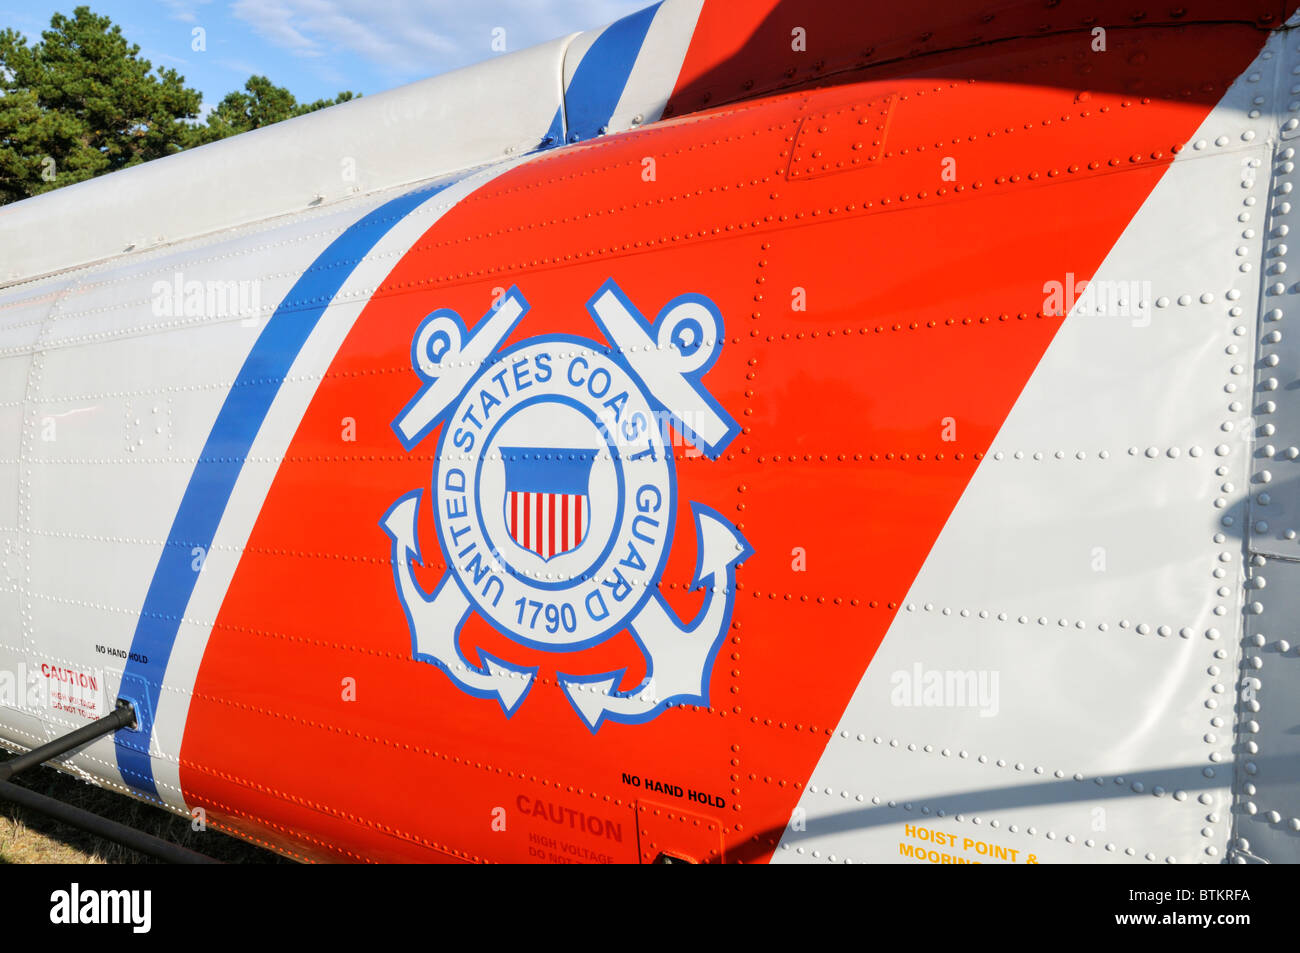 Emblem of the United States Coast Guard on fuselage of a Jayhawk search and rescue  helicopter. USA Stock Photo